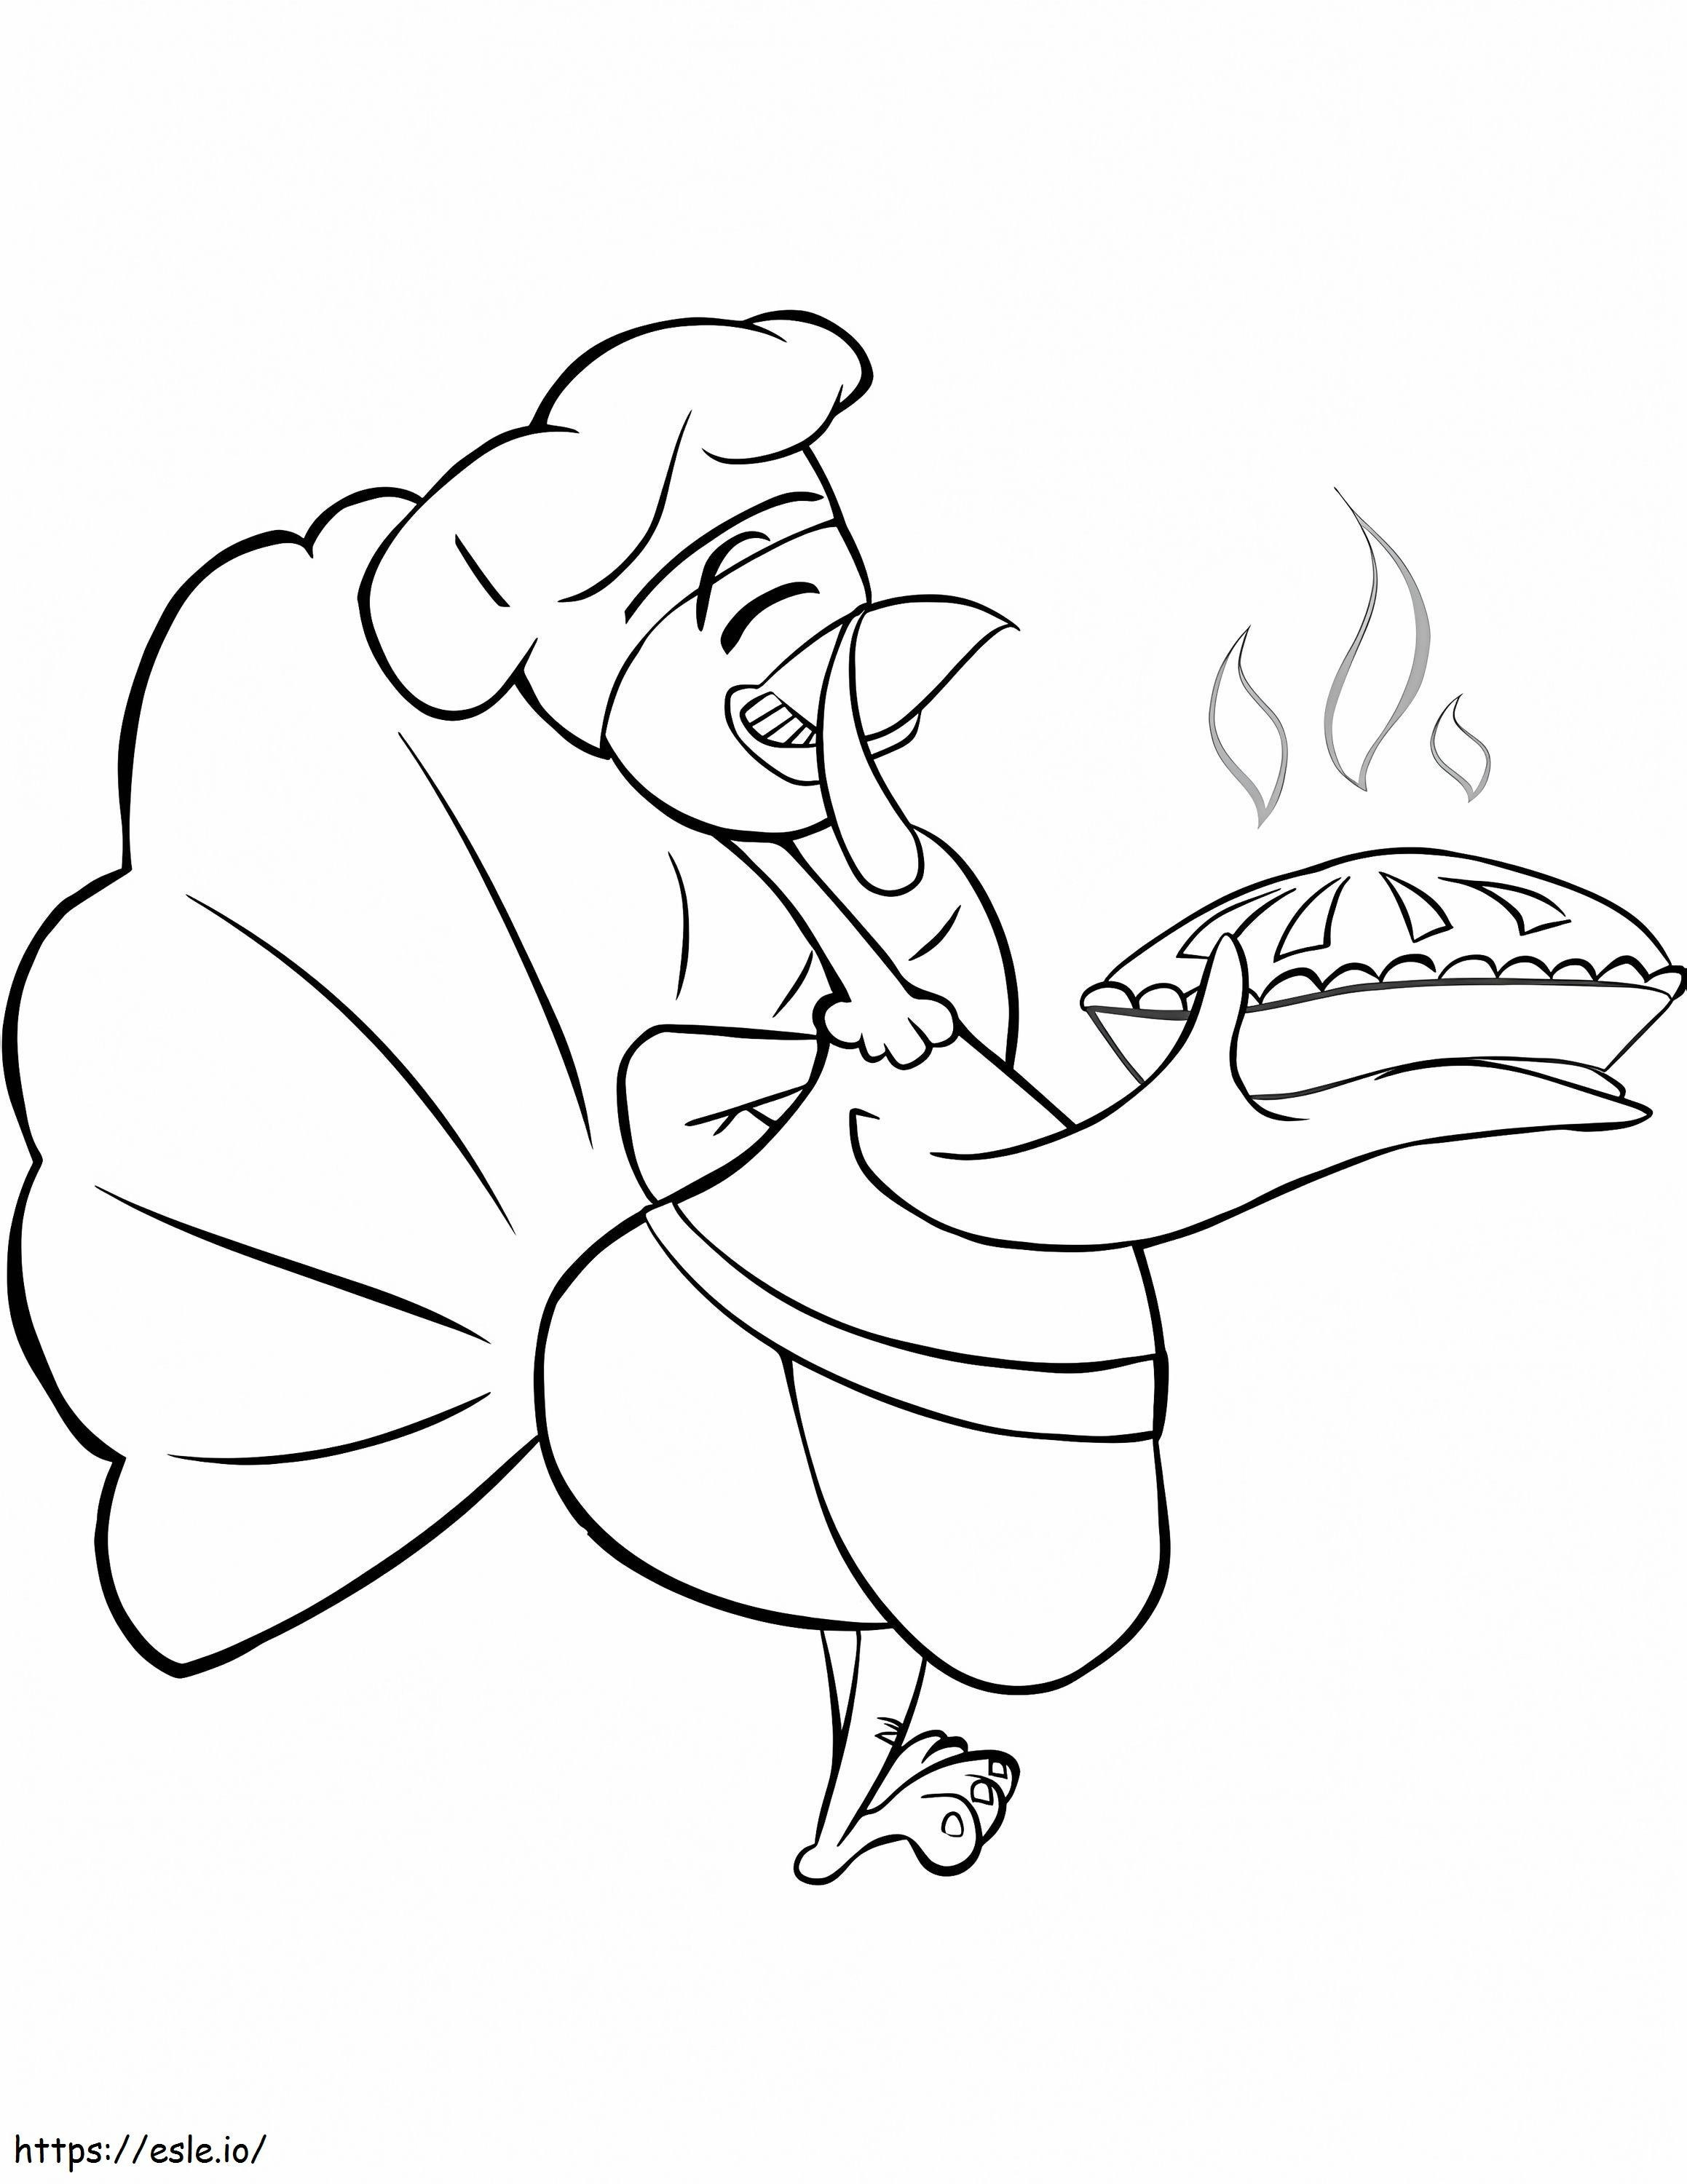 1588838207 Coloring123456789 coloring page